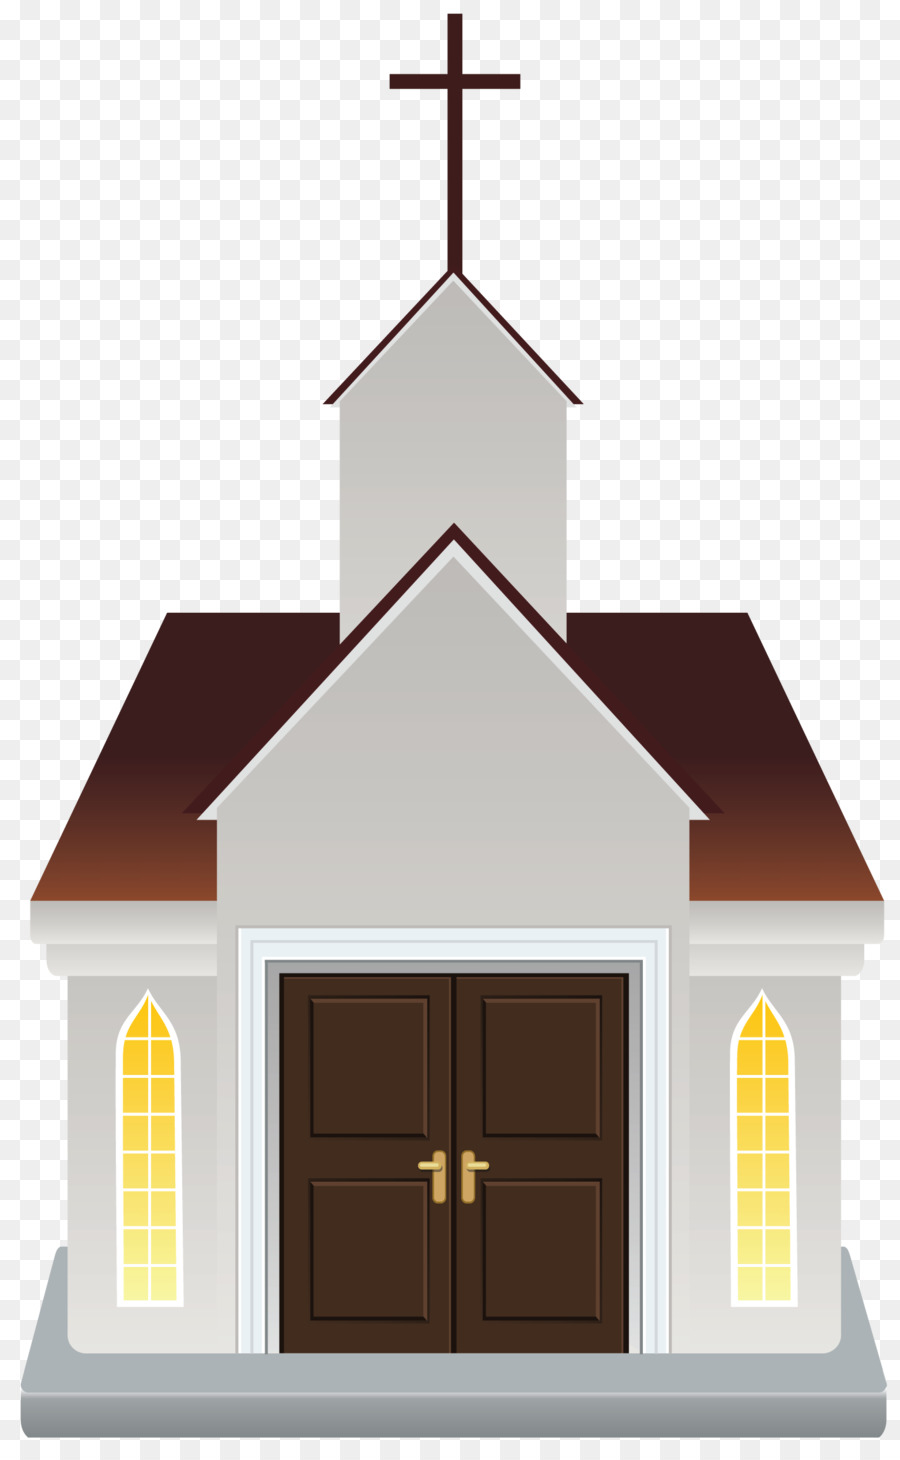 Icon Building Church Cartoon - Church Building png download - 1561*2500 - Free Transparent Icon Building png Download.